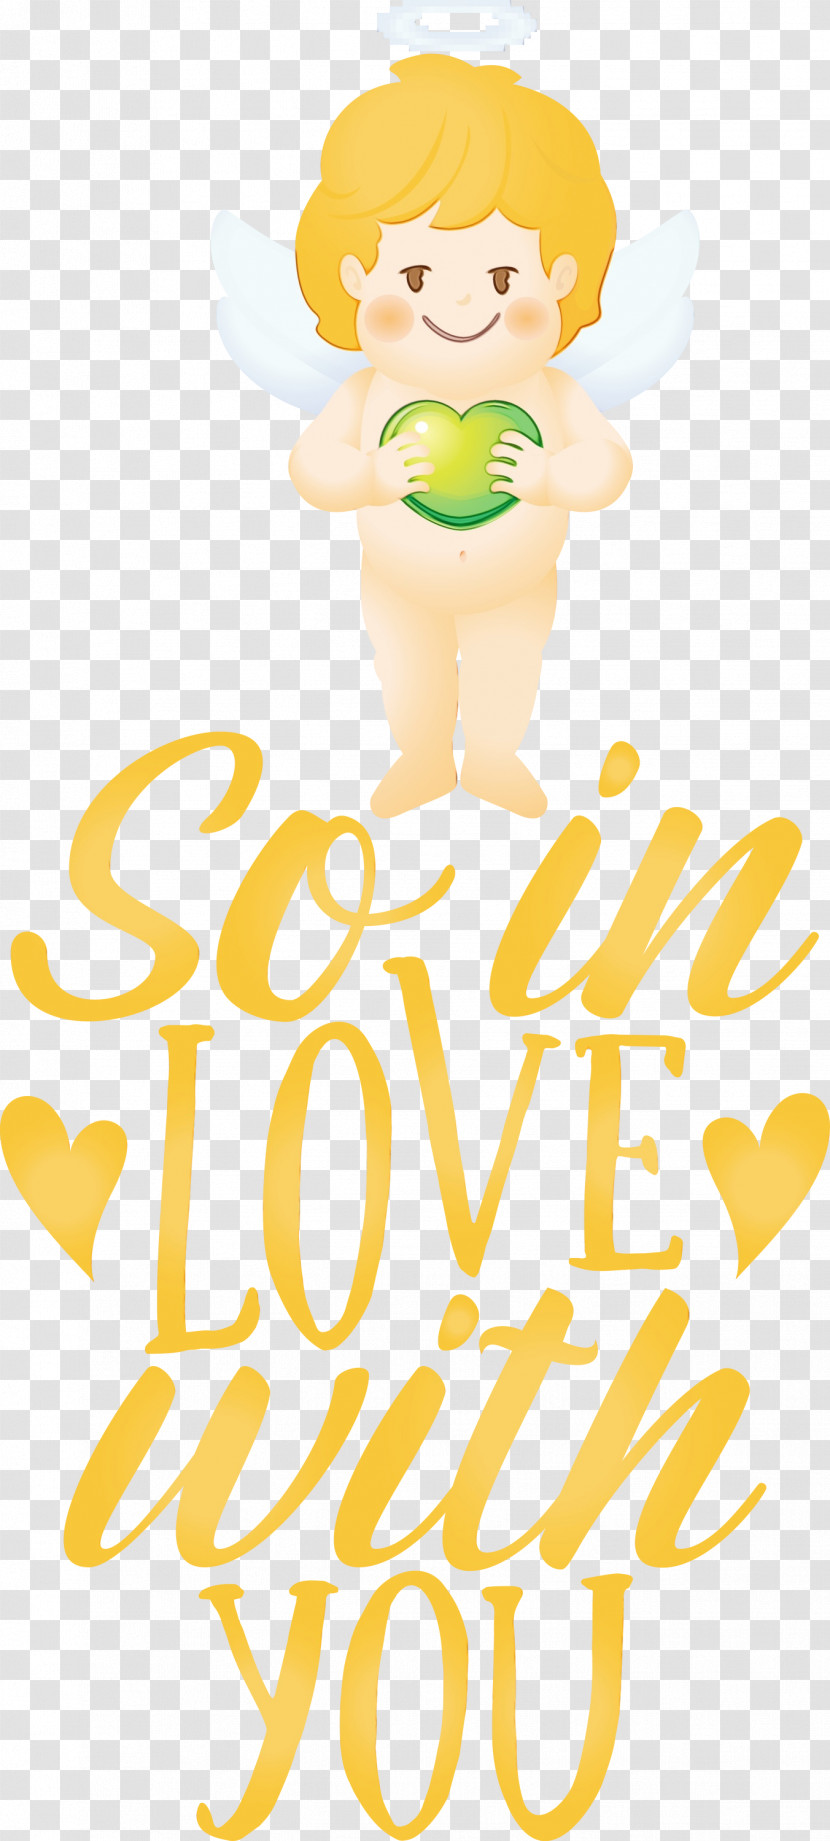 Smiley Cartoon Yellow Happiness Character Transparent PNG